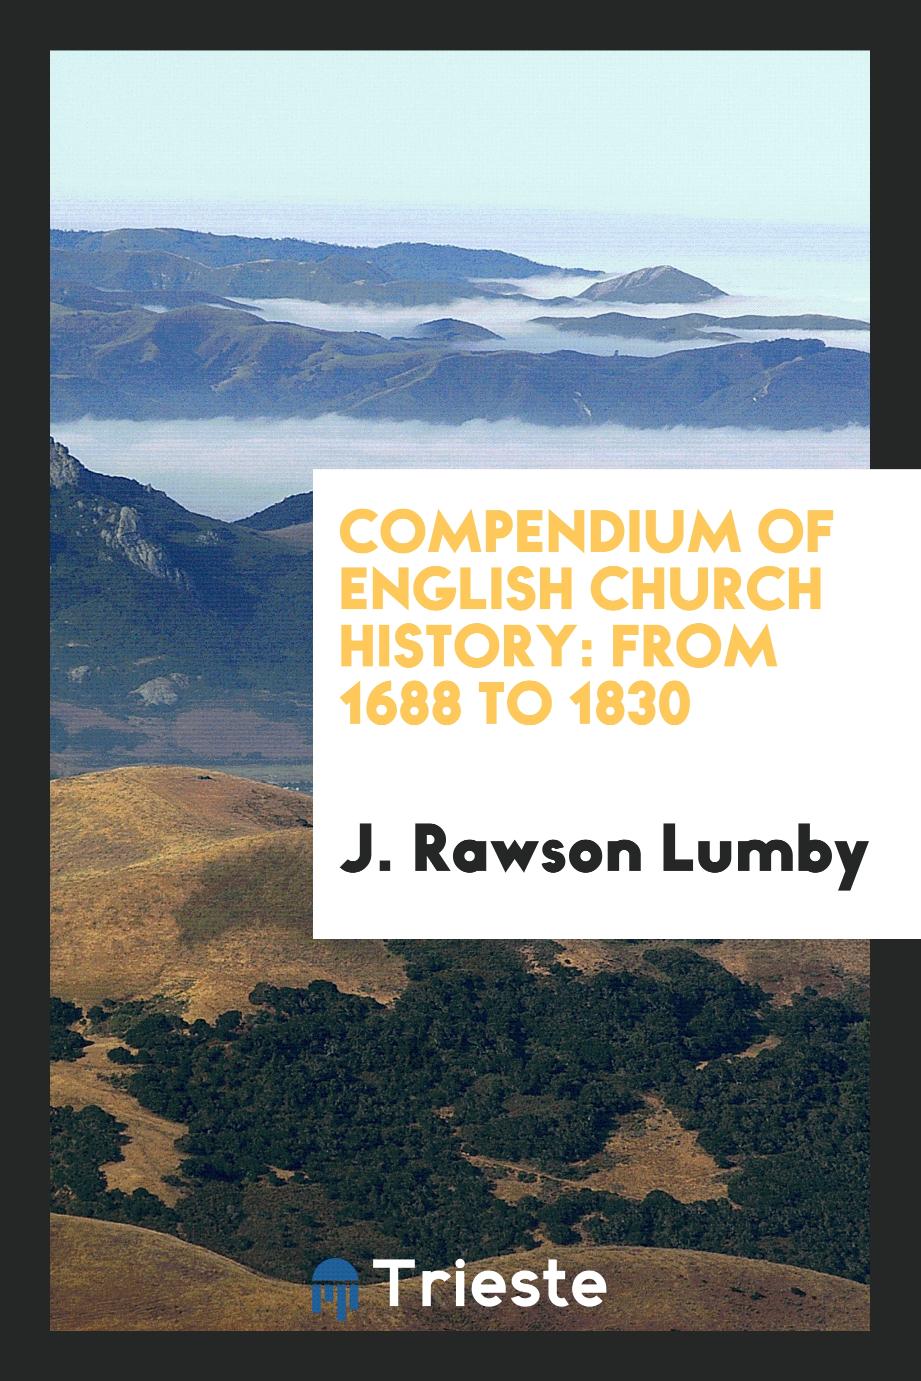 Compendium of English Church History: From 1688 to 1830